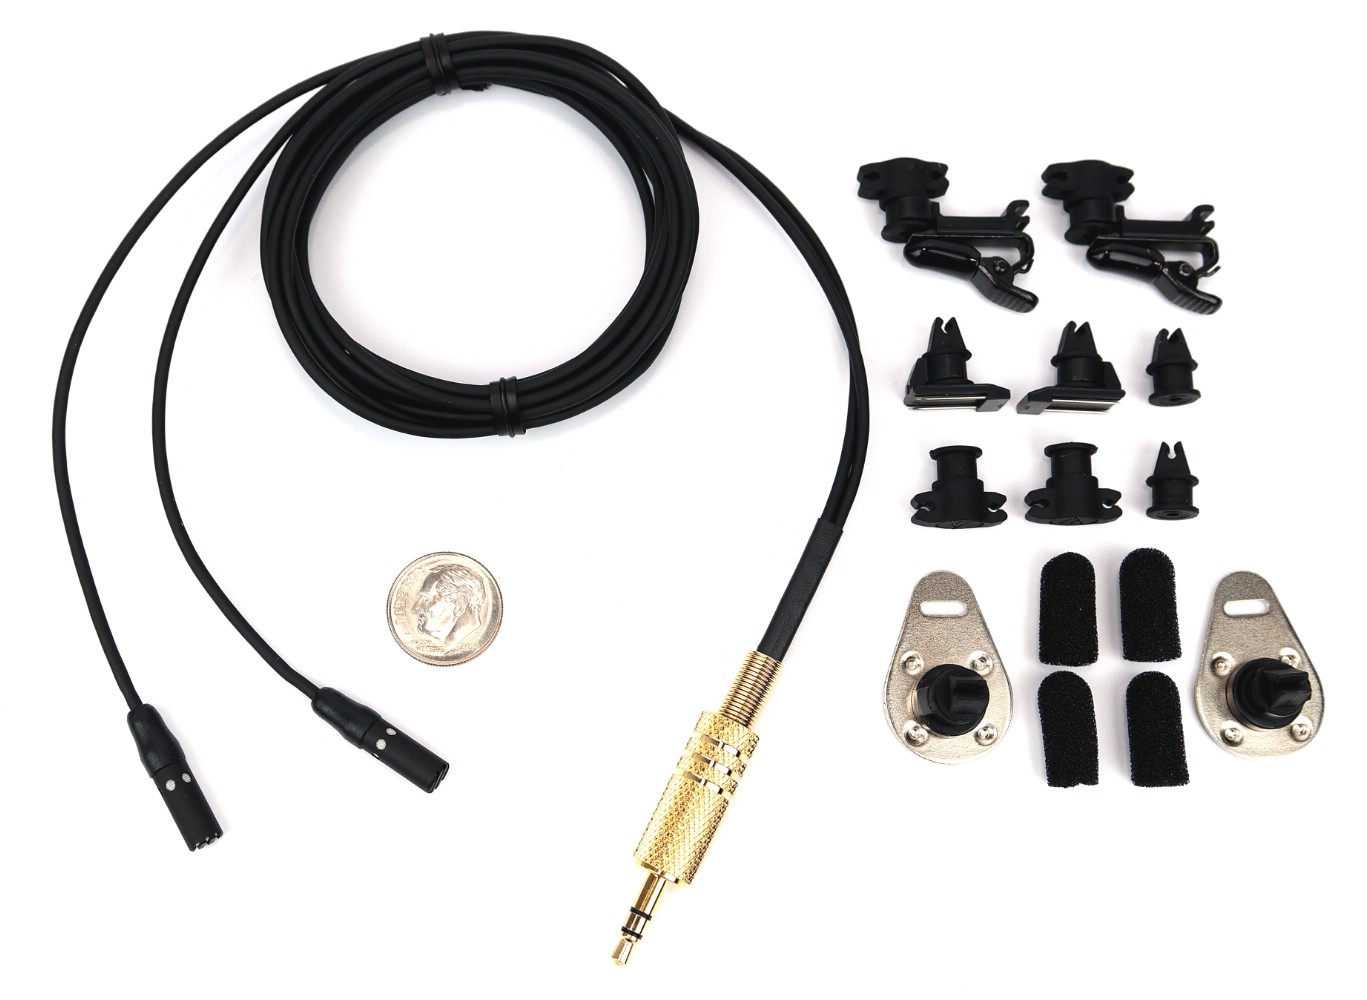 SP-CMC-9 - Micro Sized Premium Audio Technica Stereo Microphones Questions & Answers